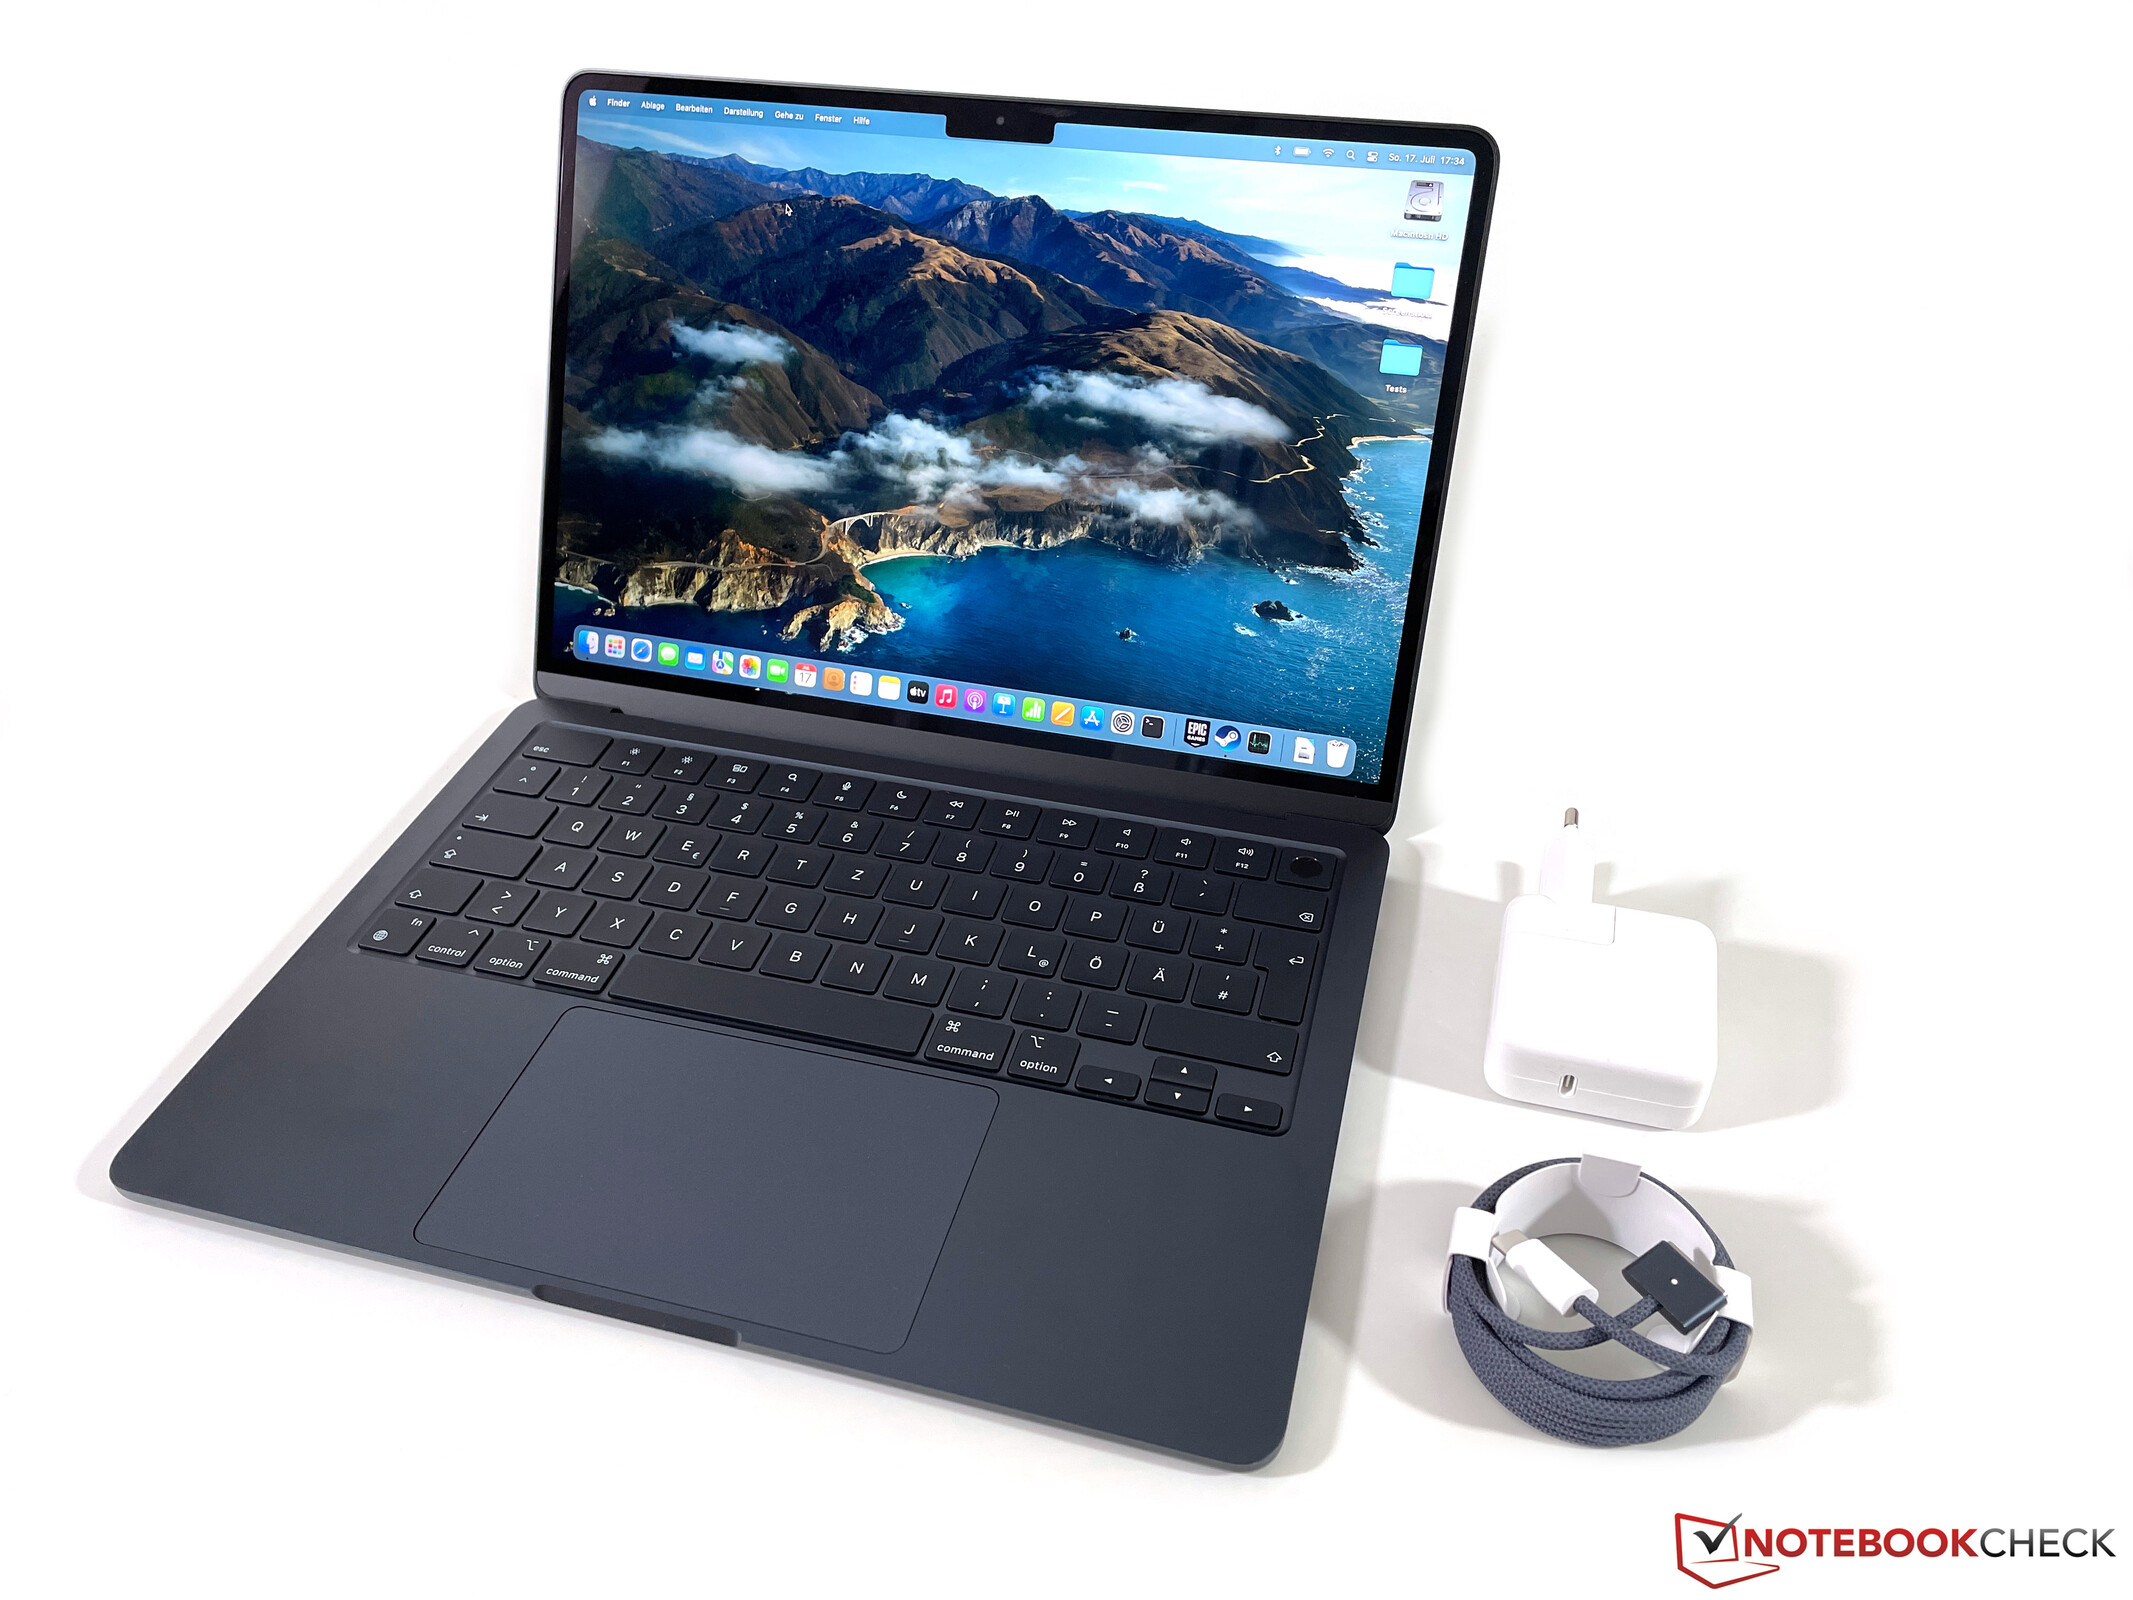 When will the M3 MacBook Air be released? Expected dates and specs